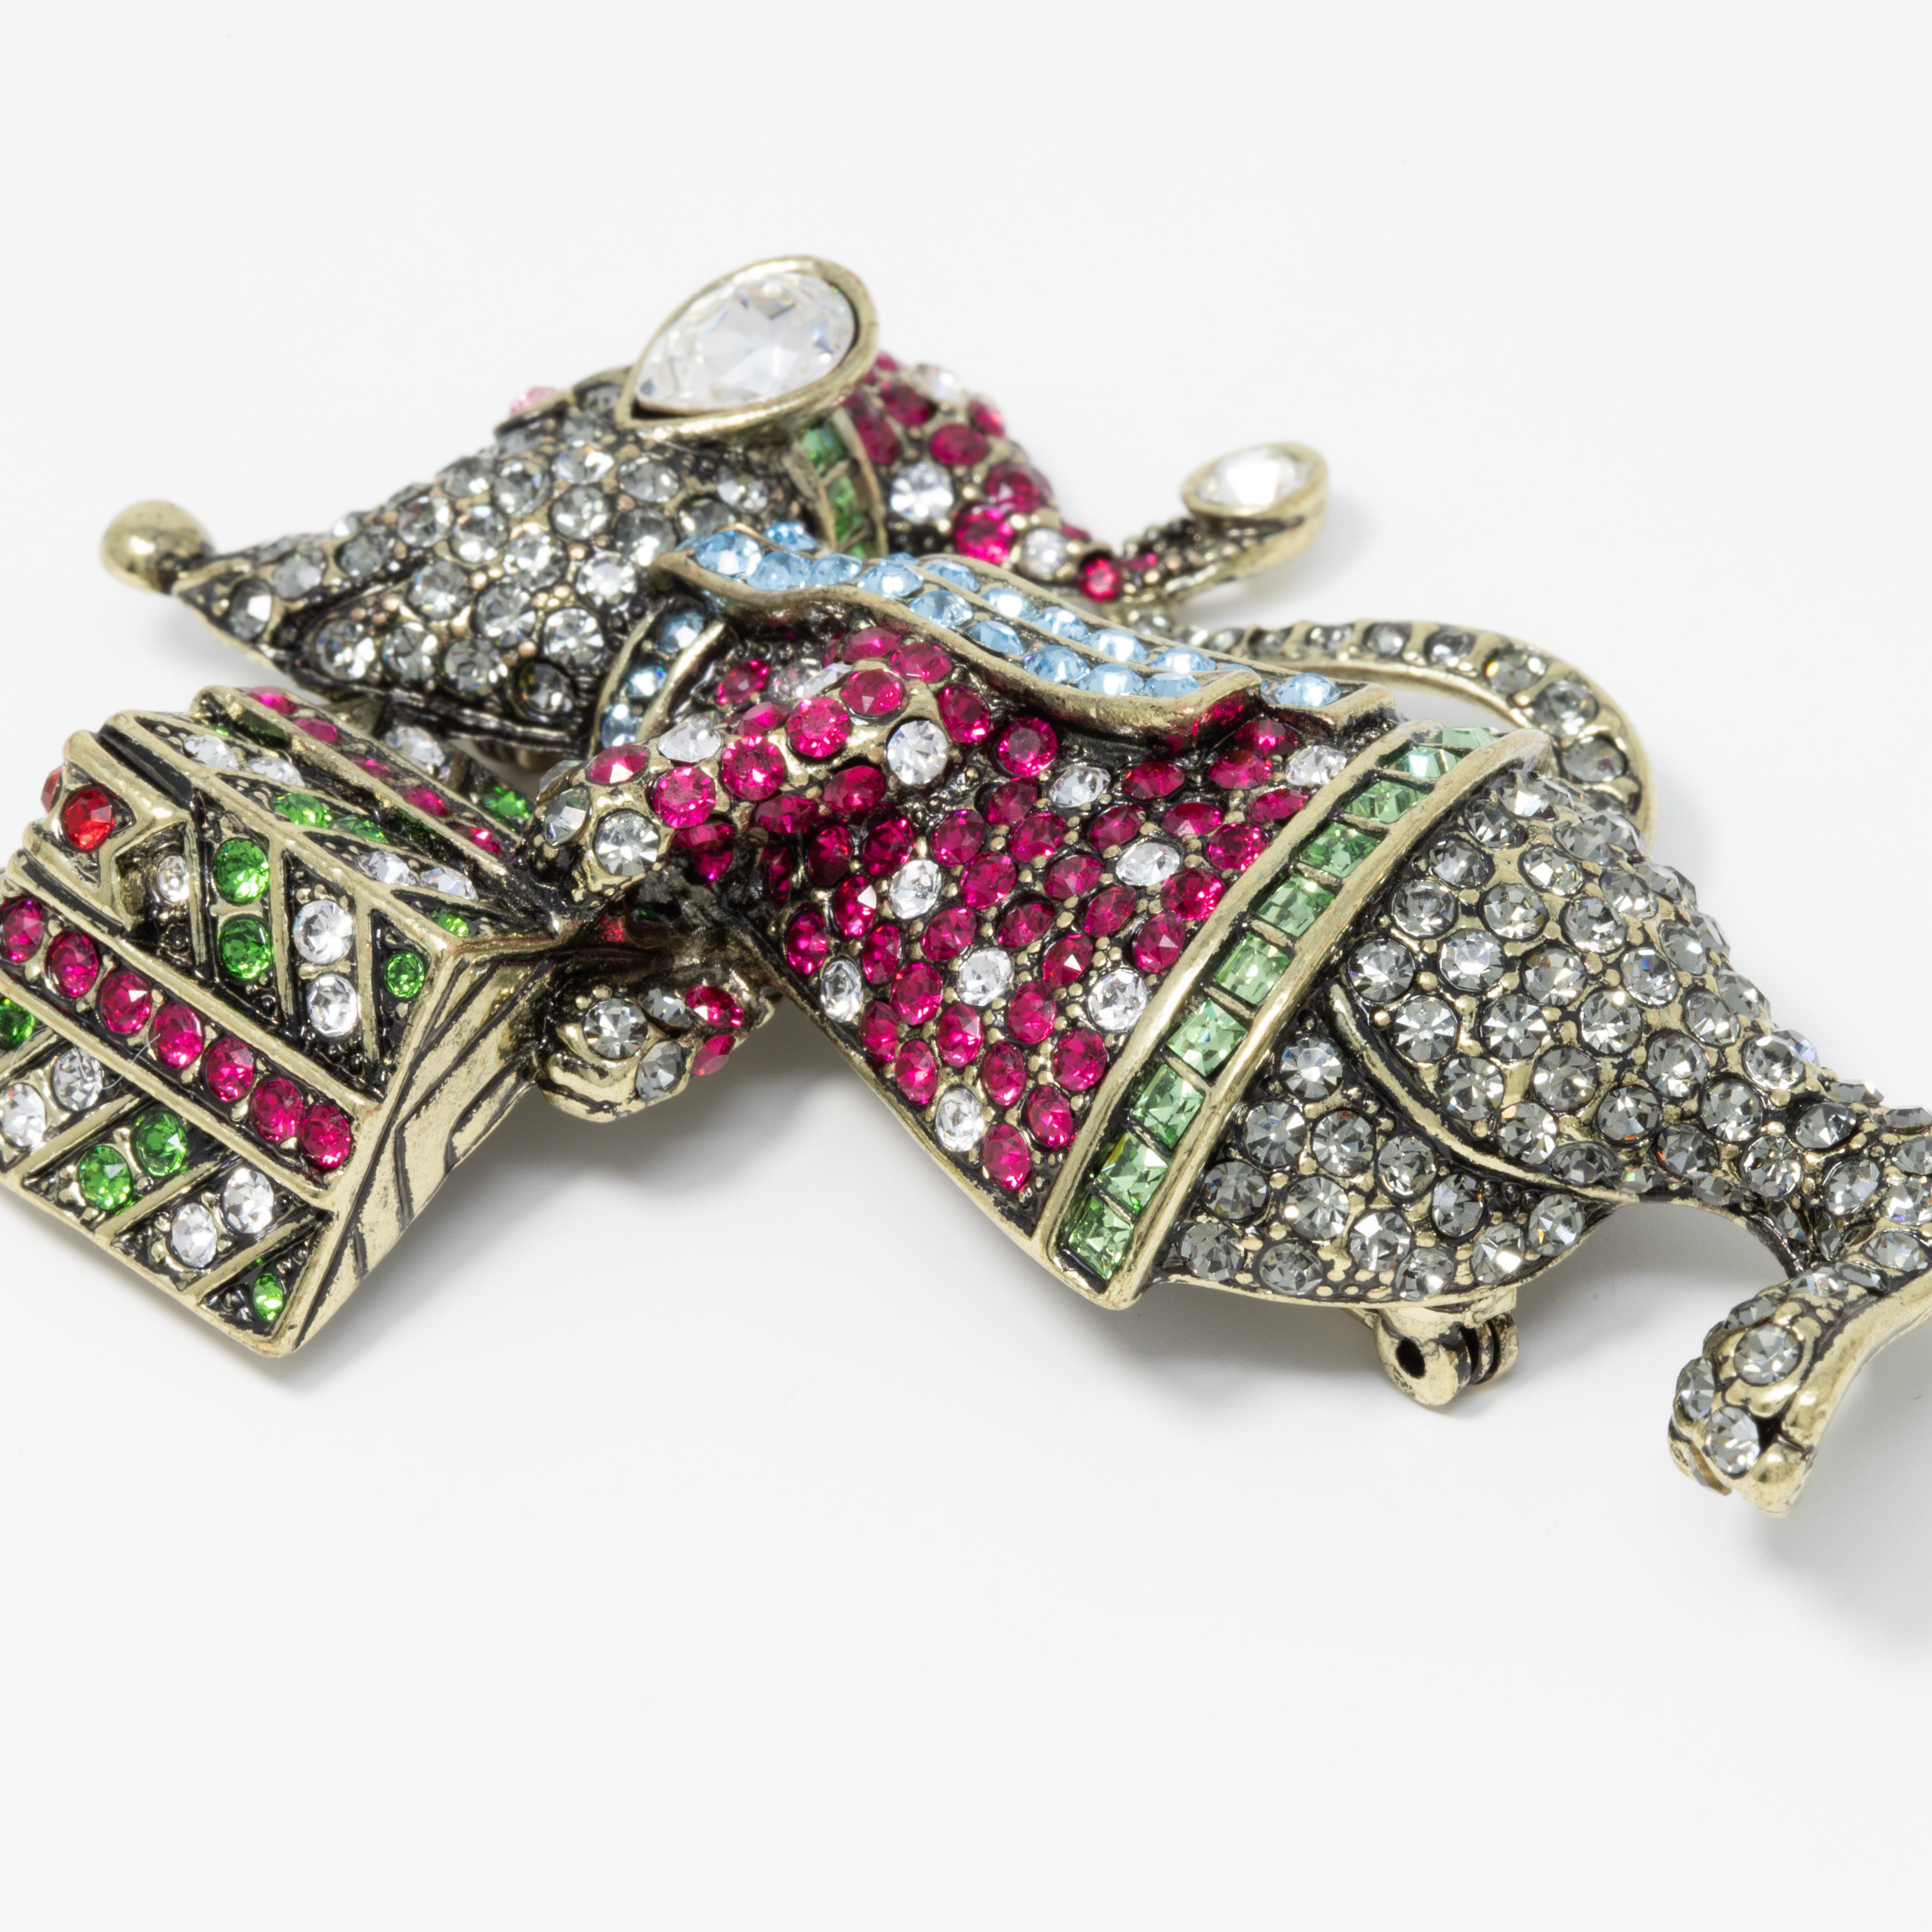 A festive mouse with a gift! This sparkling pin brooch features a crystal-encrusted mouse ready for for the holidays. Pin brooch by Heidi Daus.

Crystals :clear, rose, Siam, ruby, aquamarine, dark moss green, fern green and black diamond

Hallmarks: